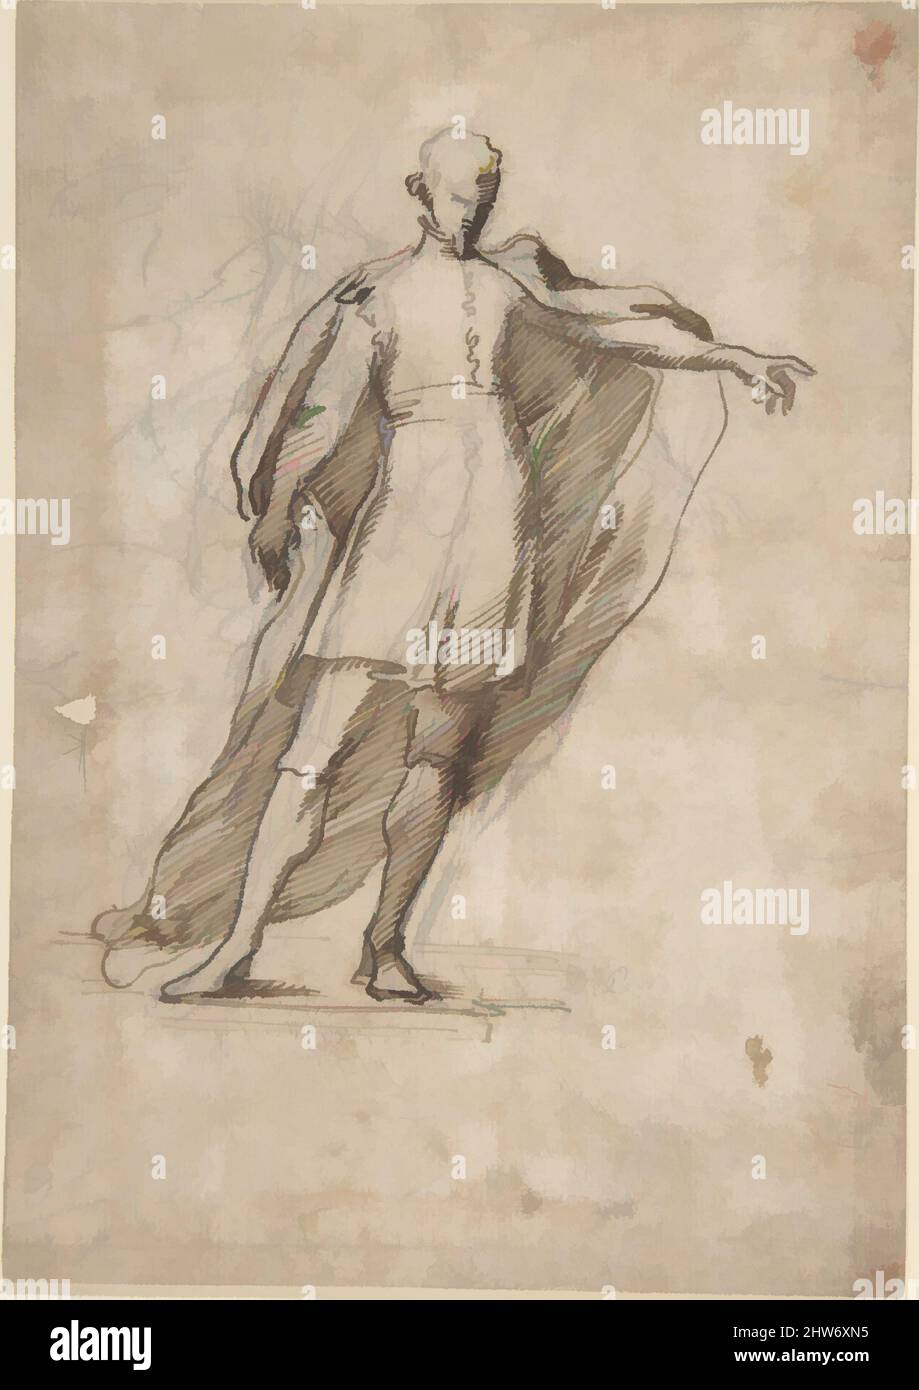 Art inspired by Sketch of a Standing Male Figure Wearing a Cape, 1800–1900, Black chalk and pen and sepia, 8-1/4 x 5-3/4 in, Drawings, Anonymous, Italian, early 19th century, Classic works modernized by Artotop with a splash of modernity. Shapes, color and value, eye-catching visual impact on art. Emotions through freedom of artworks in a contemporary way. A timeless message pursuing a wildly creative new direction. Artists turning to the digital medium and creating the Artotop NFT Stock Photo